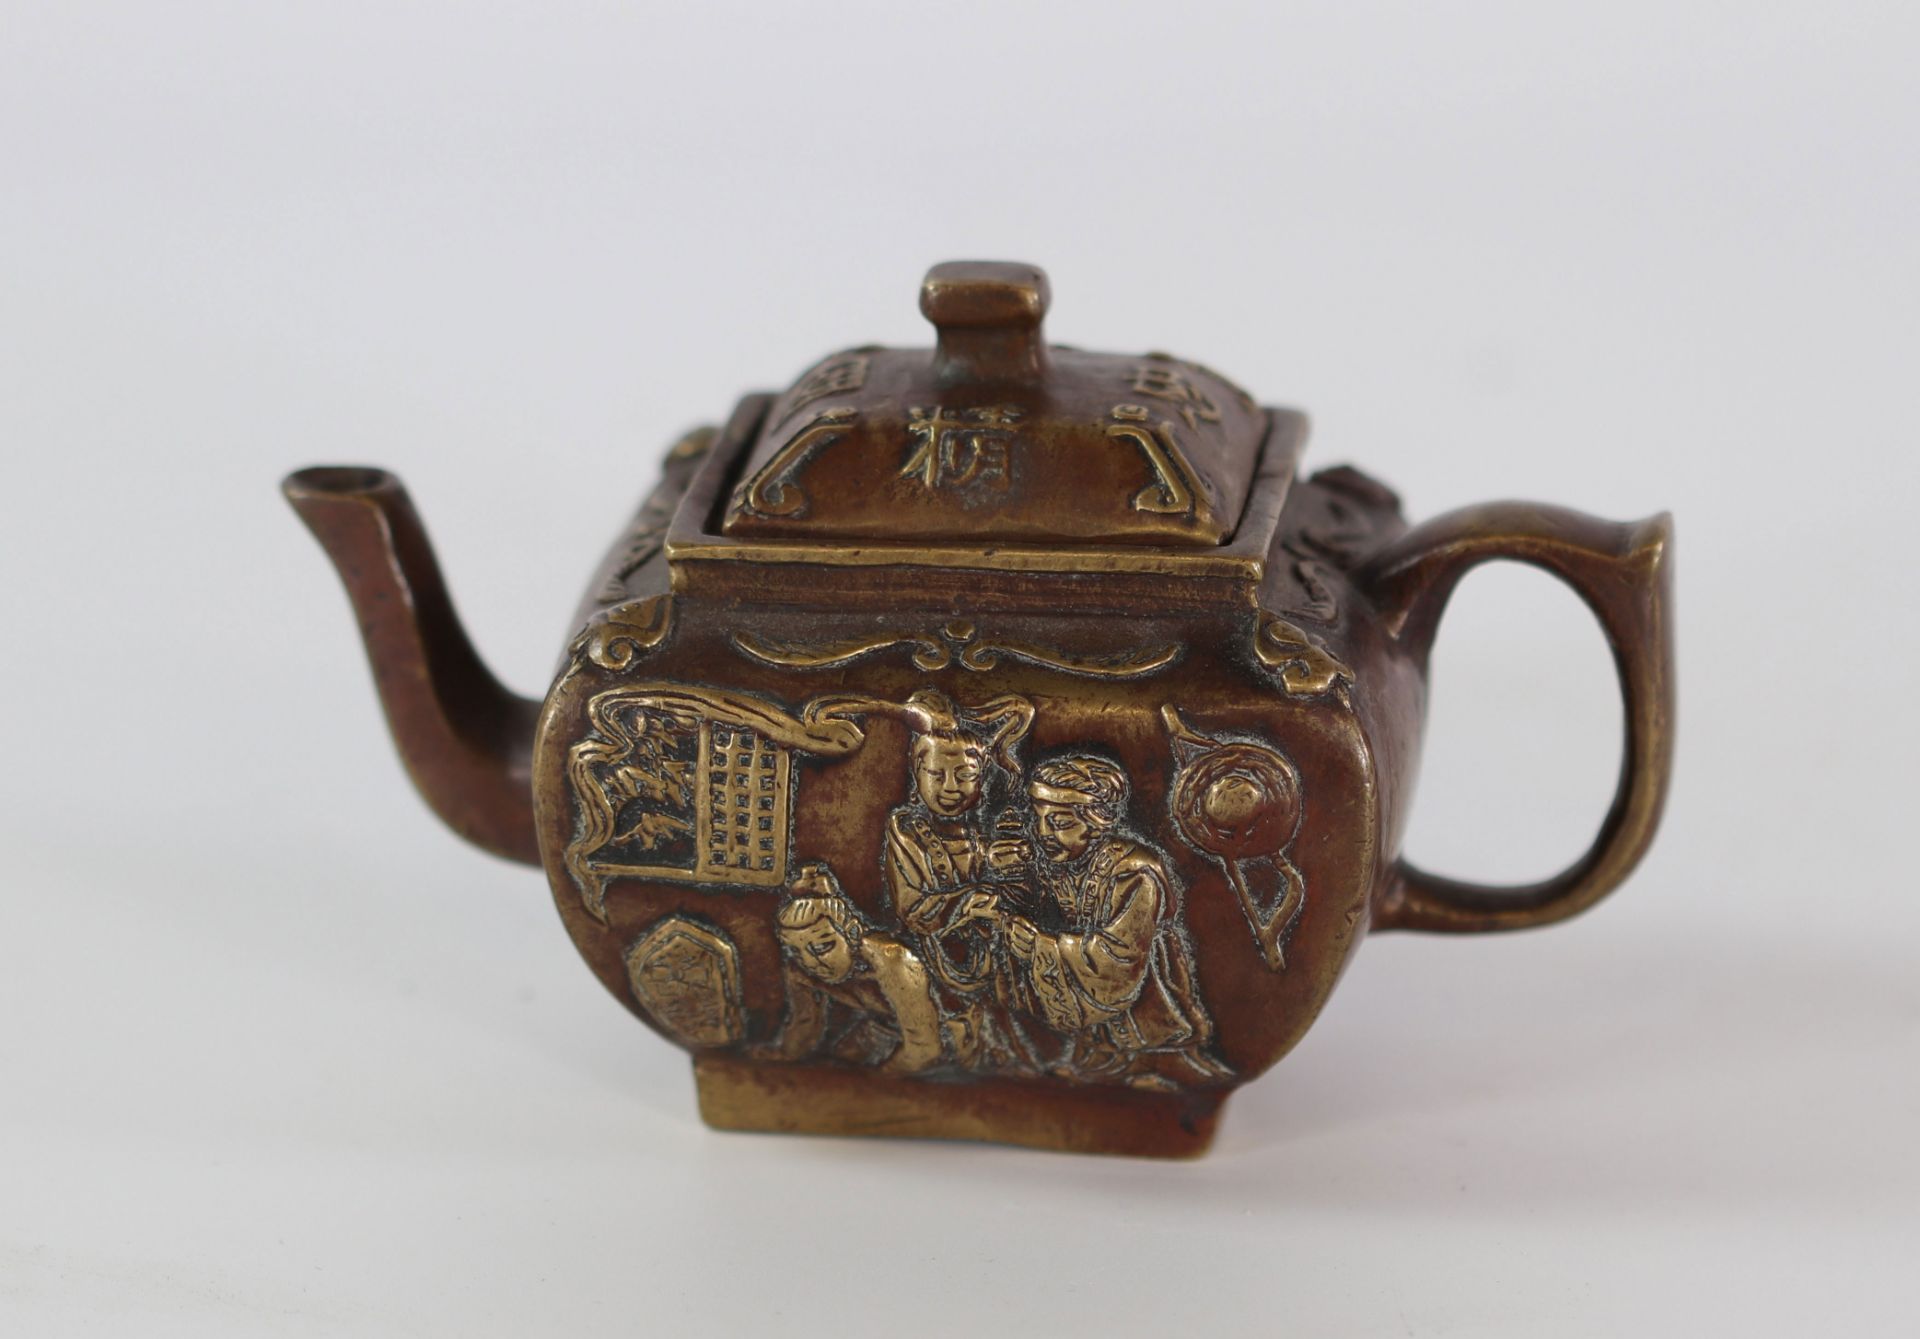 China bronze teapot decorated with characters